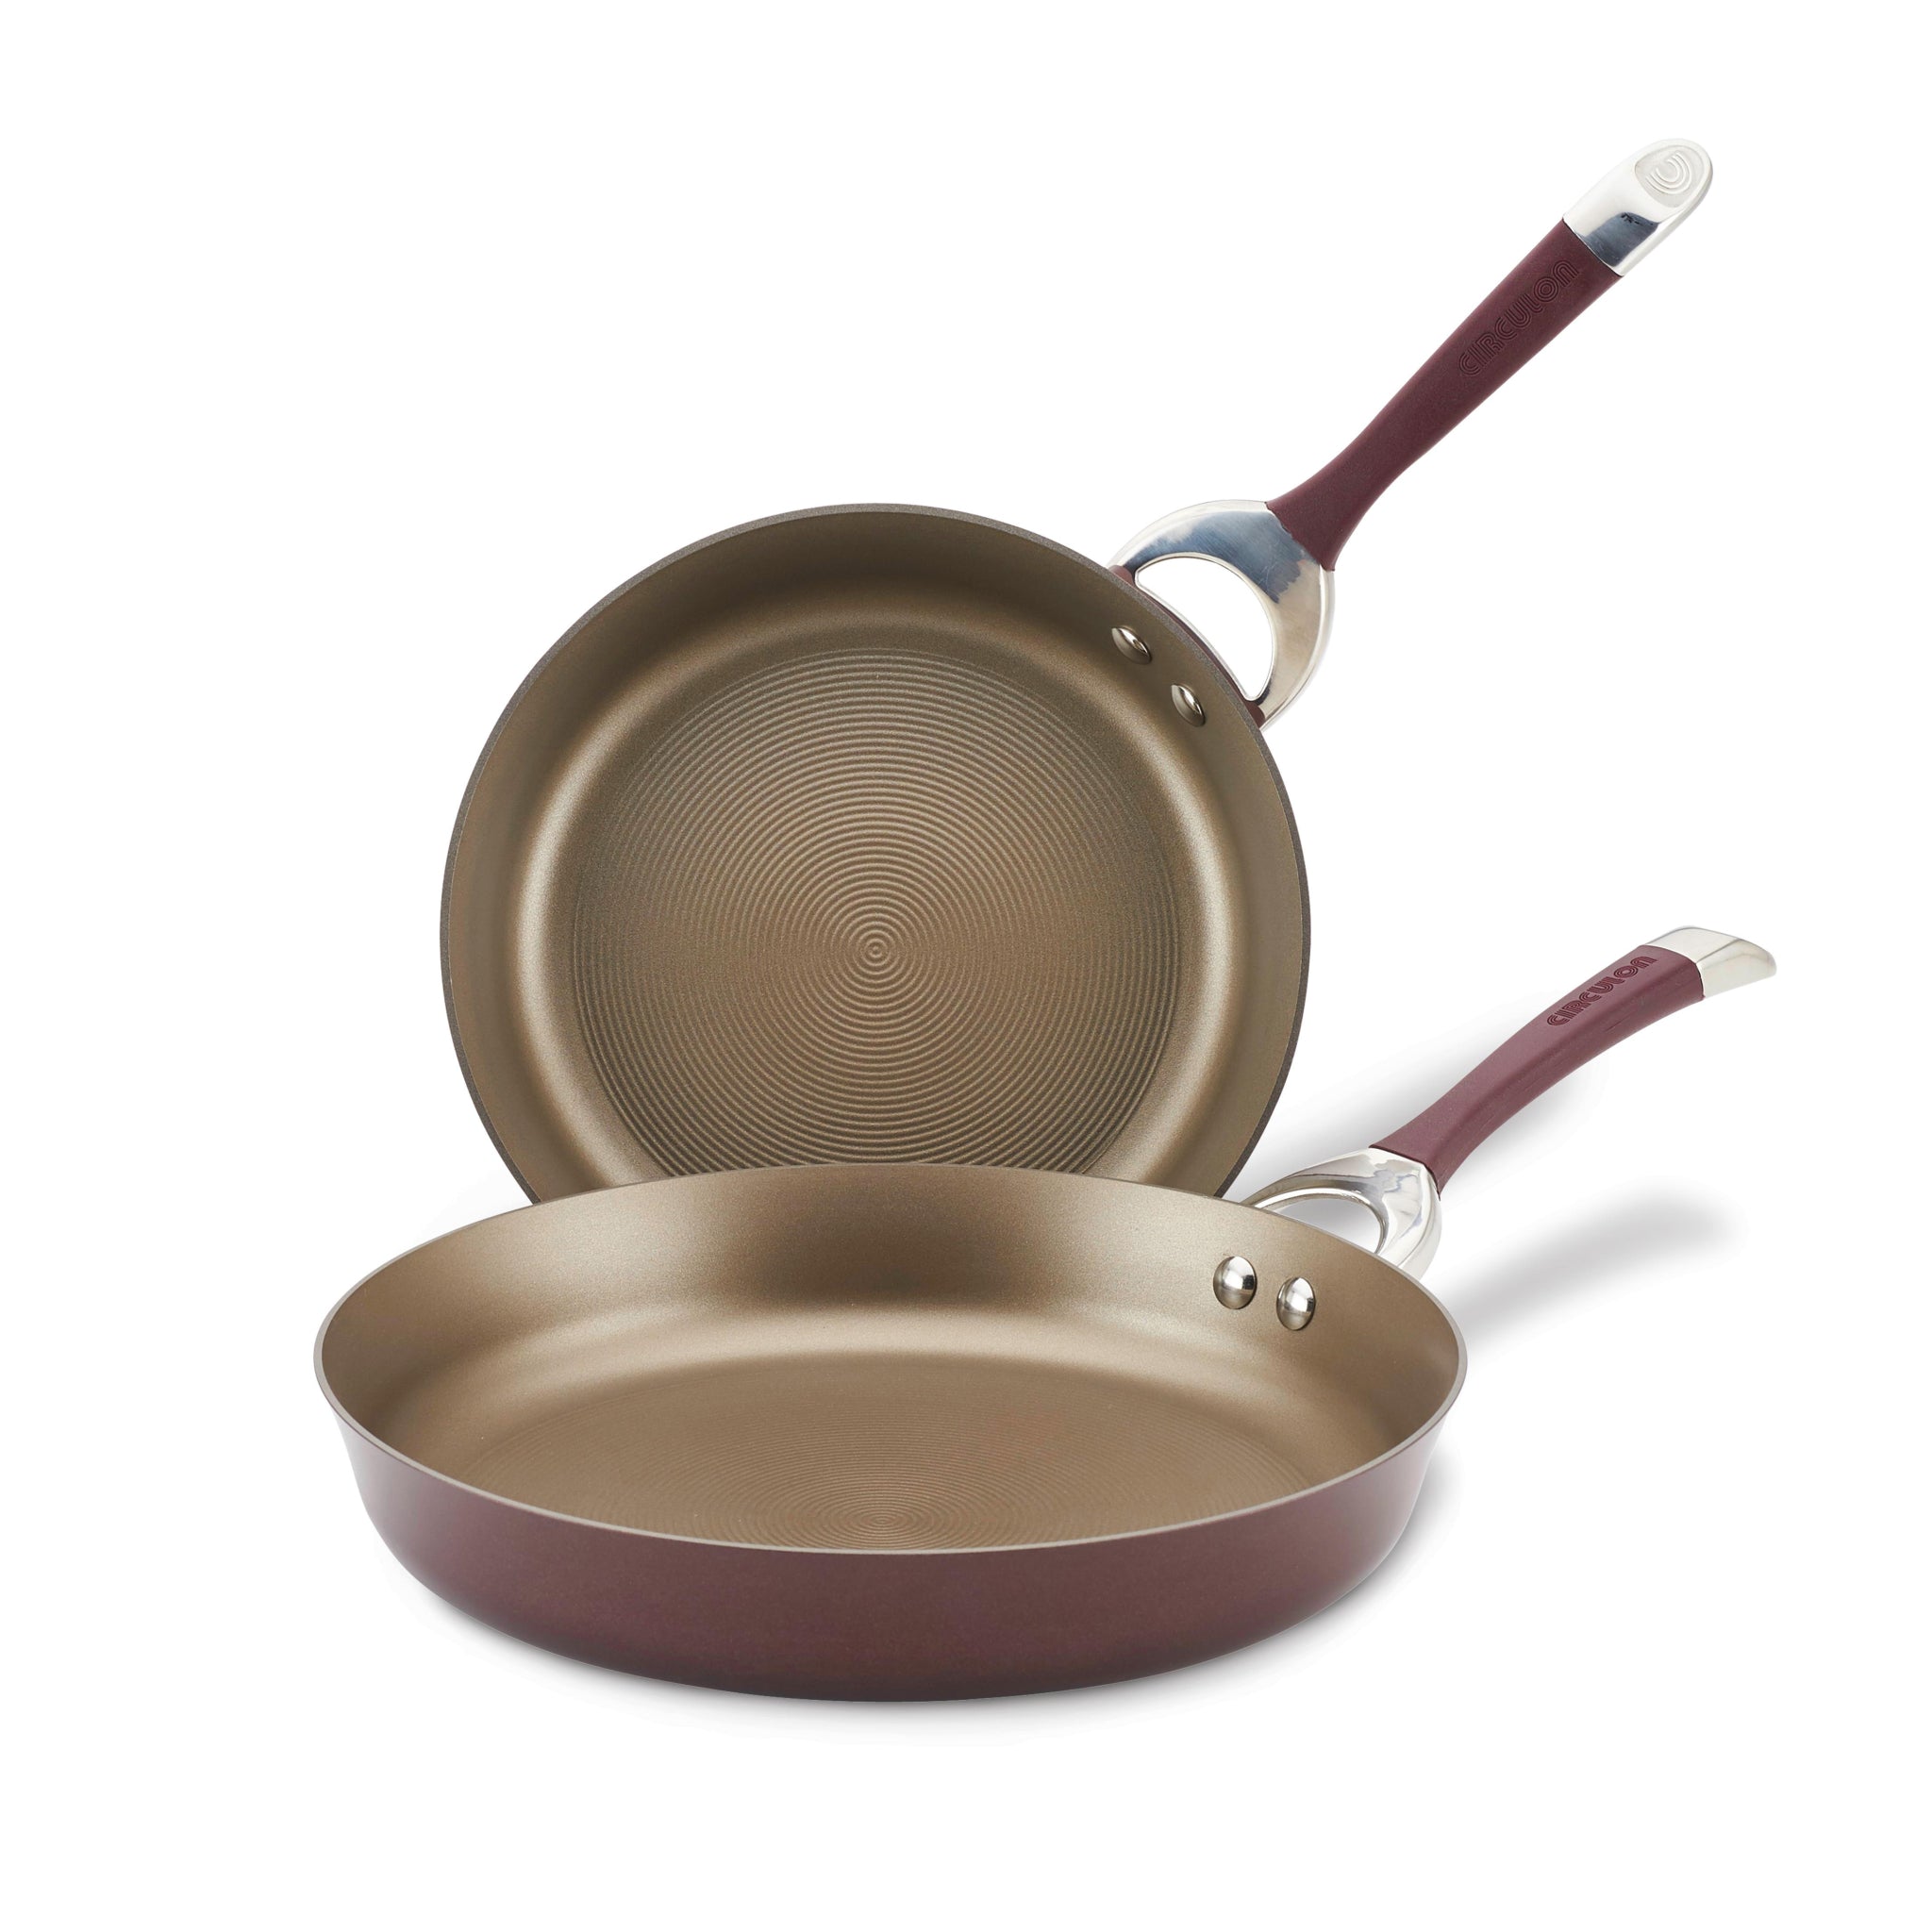 Cooks Standard 5 Quart/11-Inch Hard Anodized Nonstick Deep Saute Pan with Lid